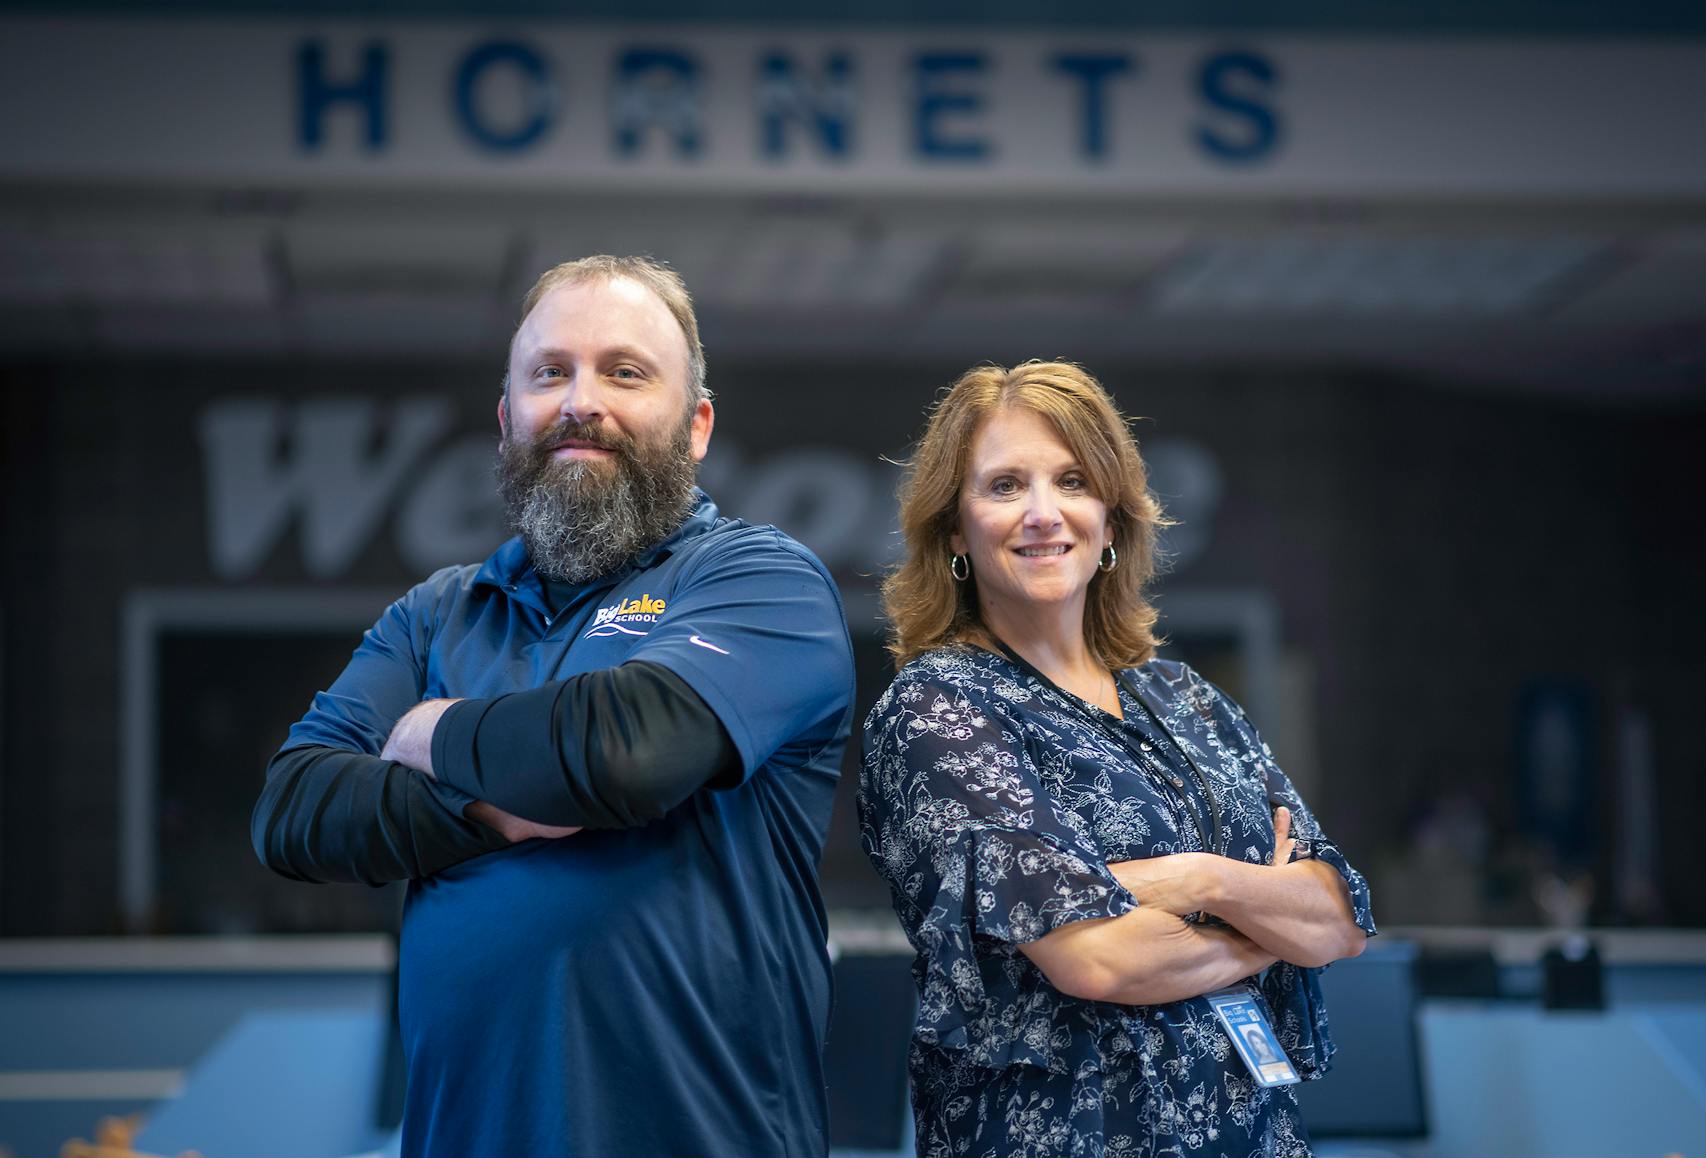 IT coordinator Nathan Hamrin, left, and Big Lake Middle School Assistant Principal Keri Neubauer prepped hundreds of laptops for students at Big Lake High School.